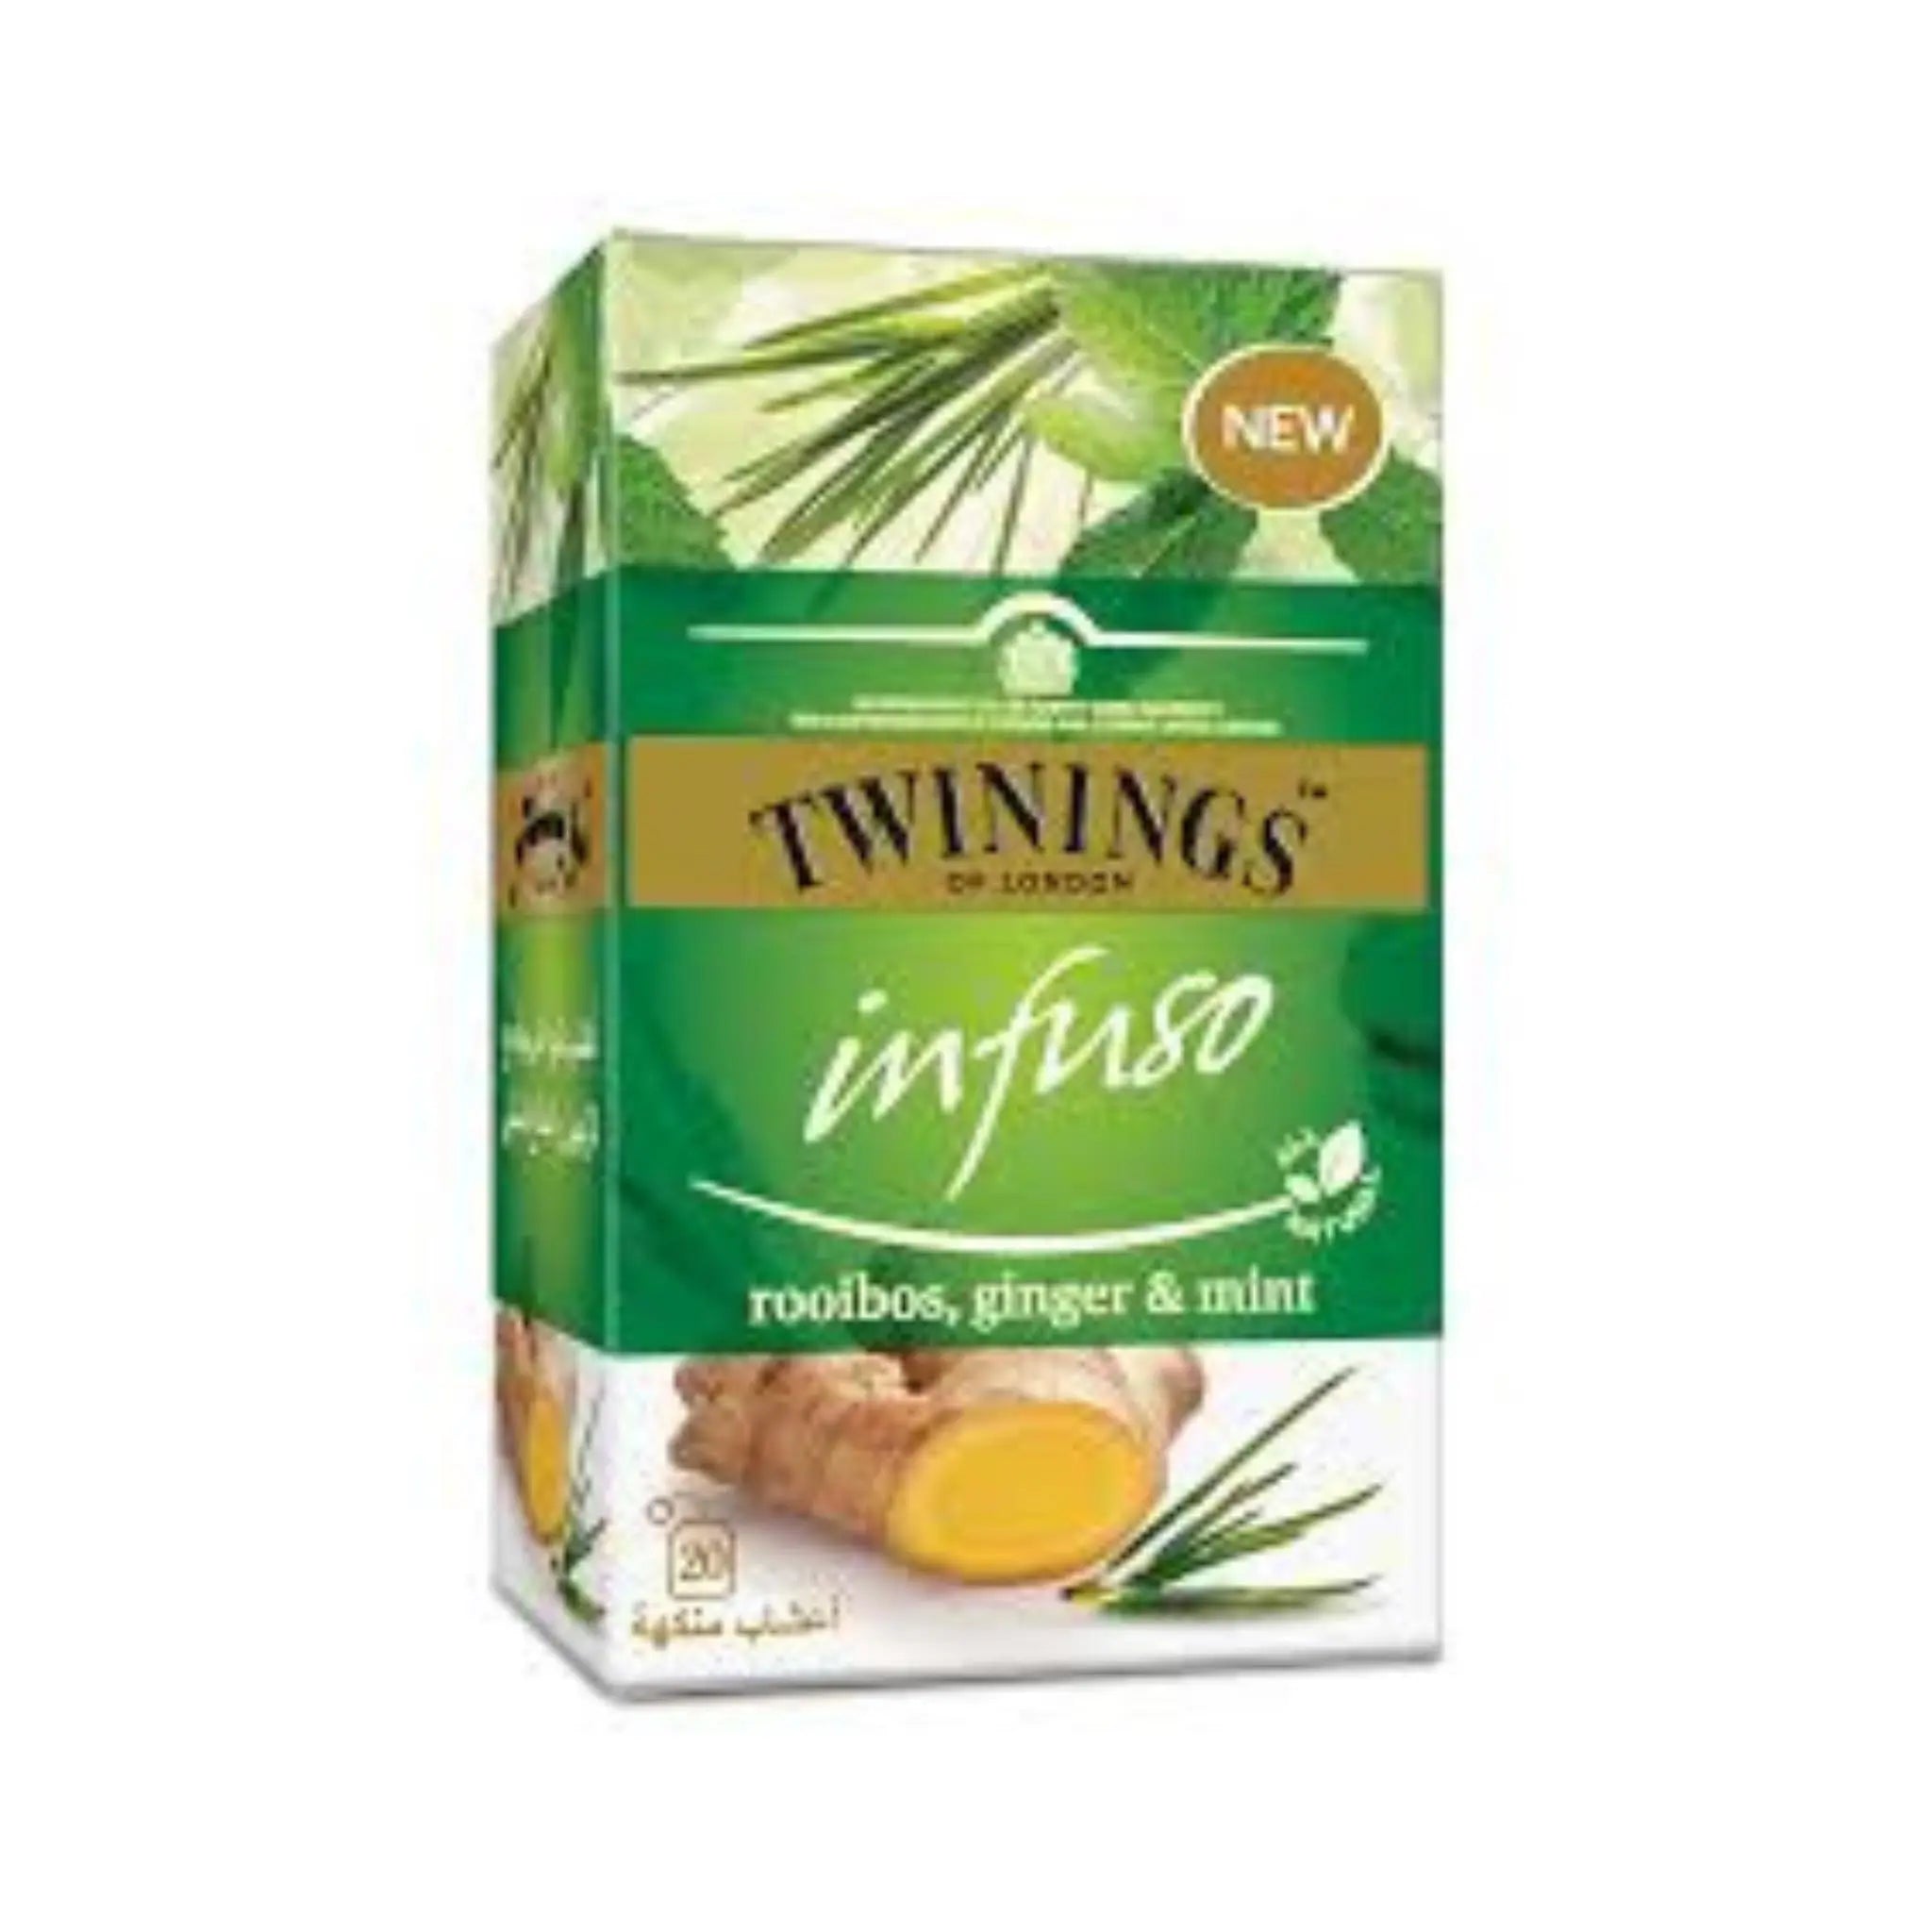 Twinings Infuso Rooibos, Ginger & Mint 20 Tea Bags (6x20's) Twinings